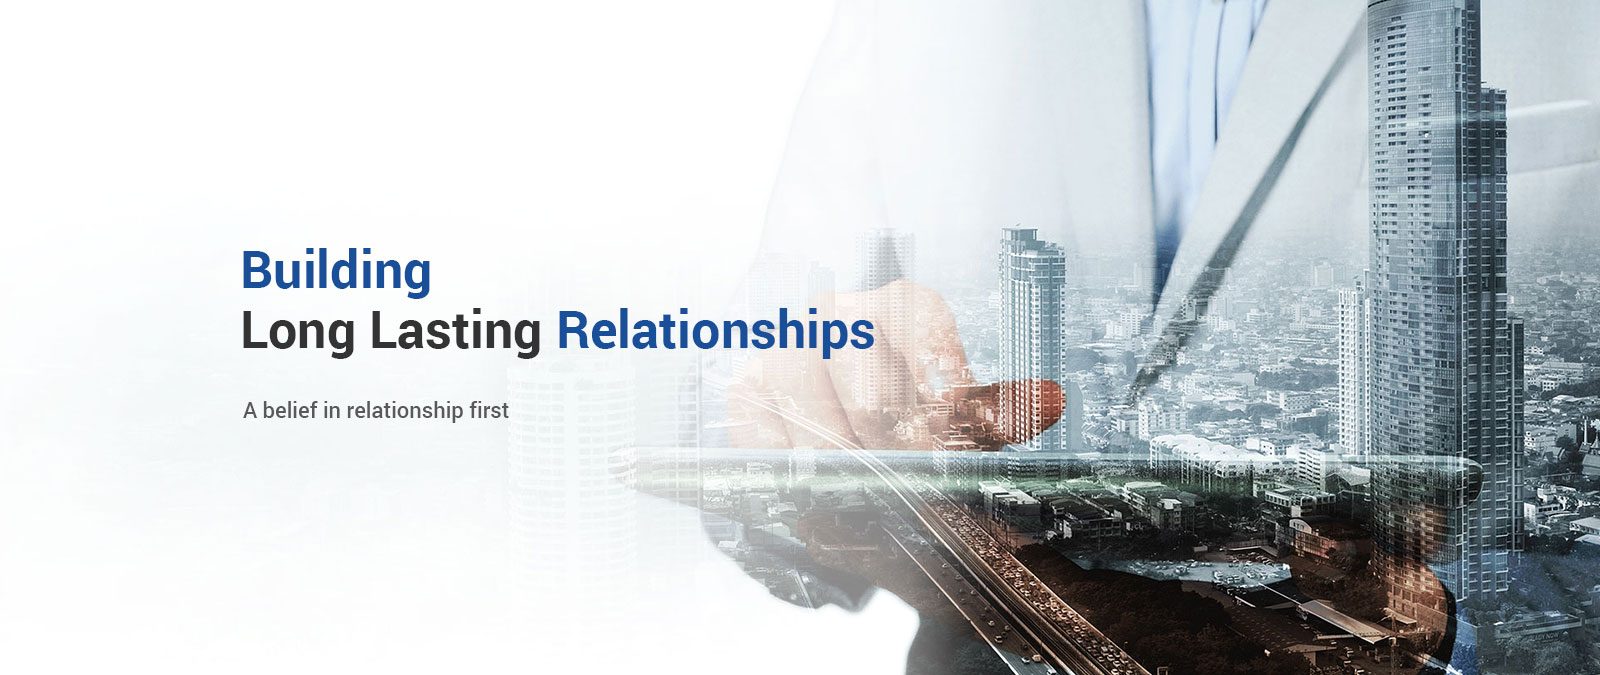 Building Long Lasting Relationships - A belief in relationship first